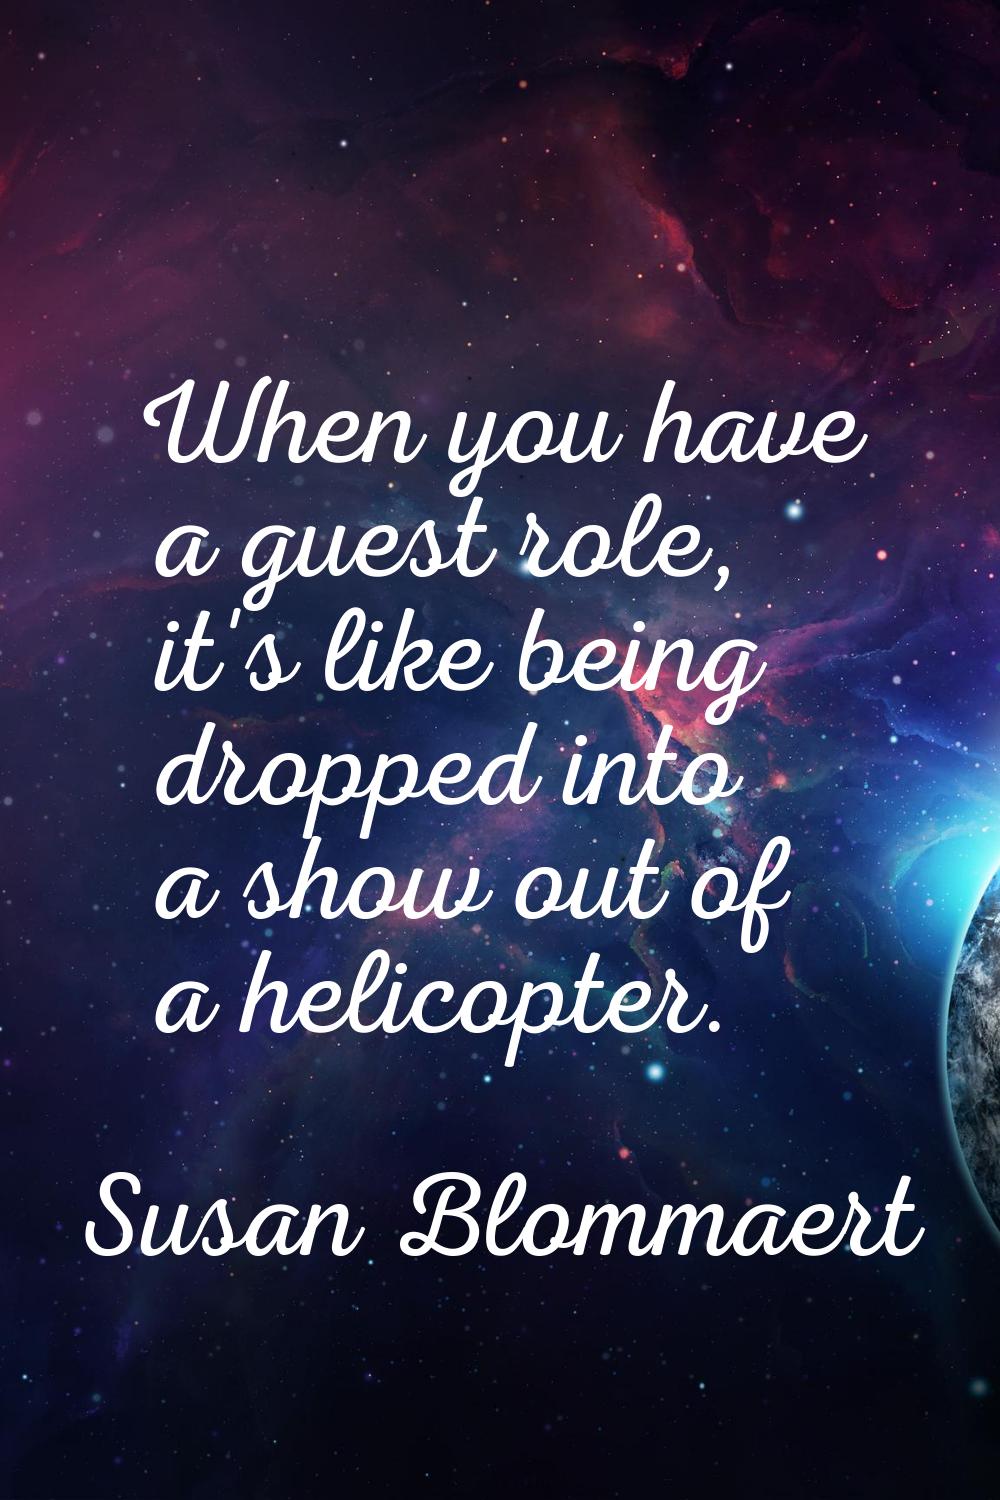 When you have a guest role, it's like being dropped into a show out of a helicopter.